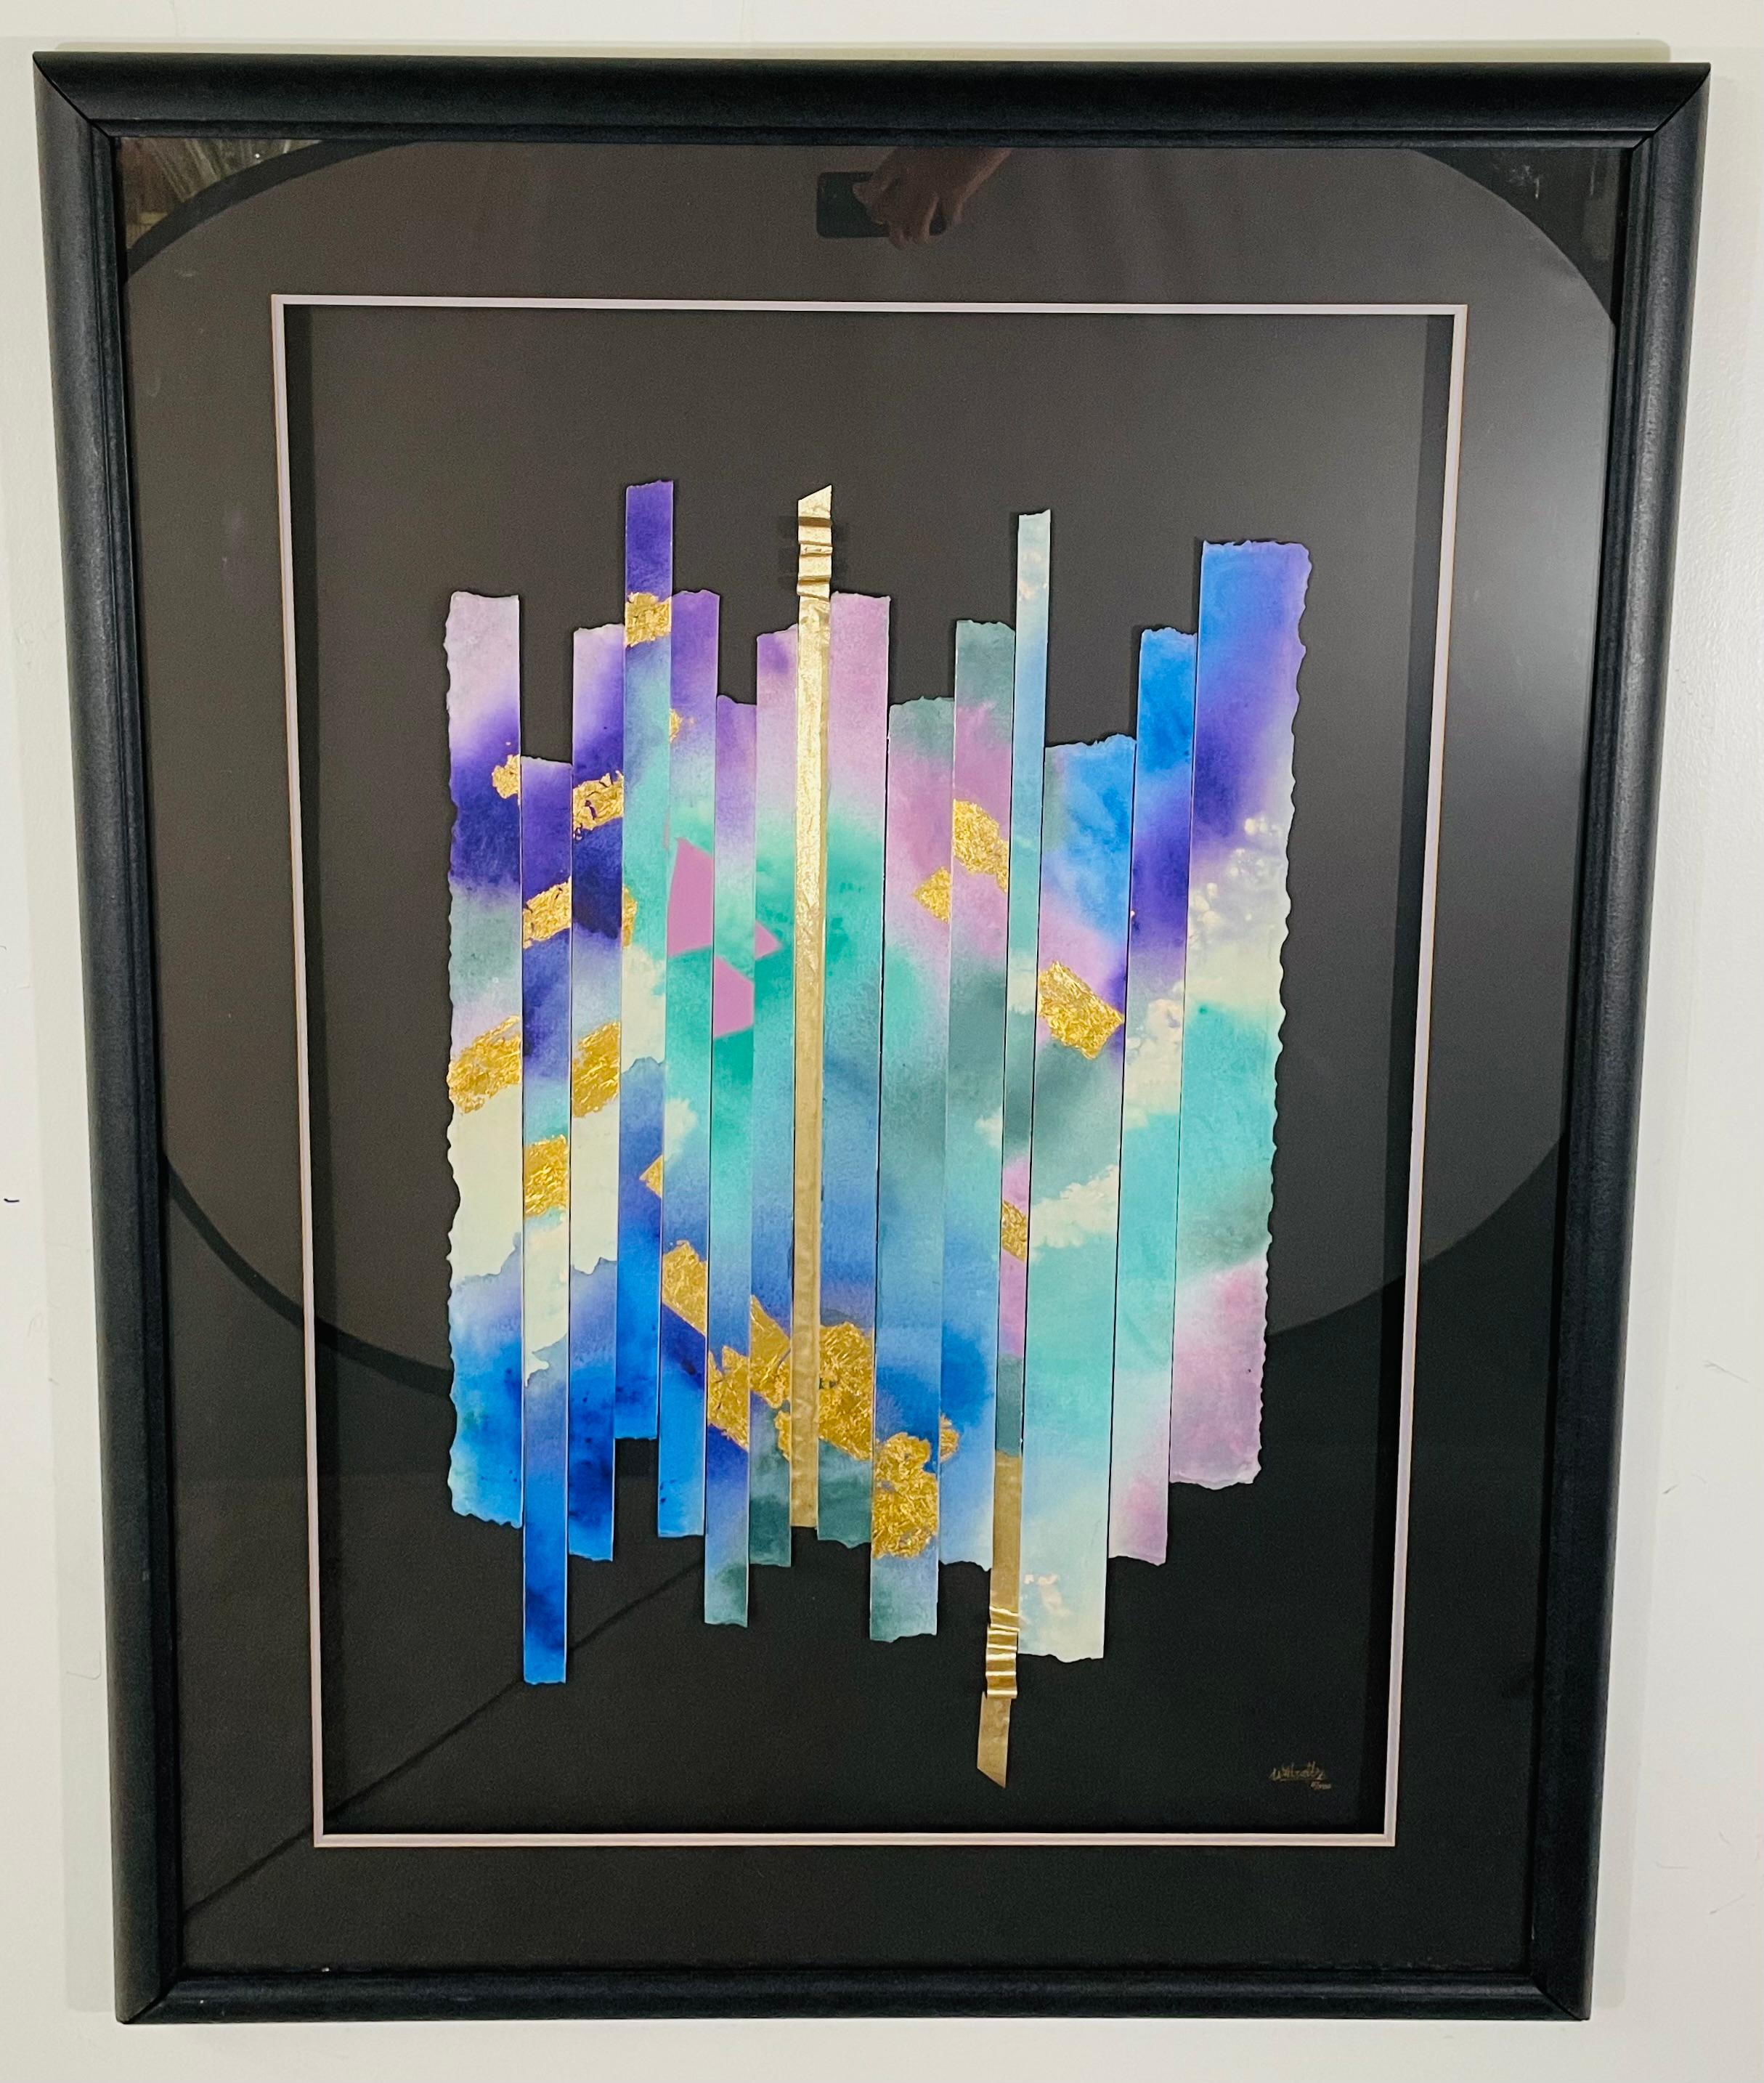 A Modern mixed media print featuring multicolor strips in purple, blue, turquoise, white and gold tone on a black background. The art work is numbered 5/500 , signed by the artist also matted and framed in black. 

Dimensions: 33